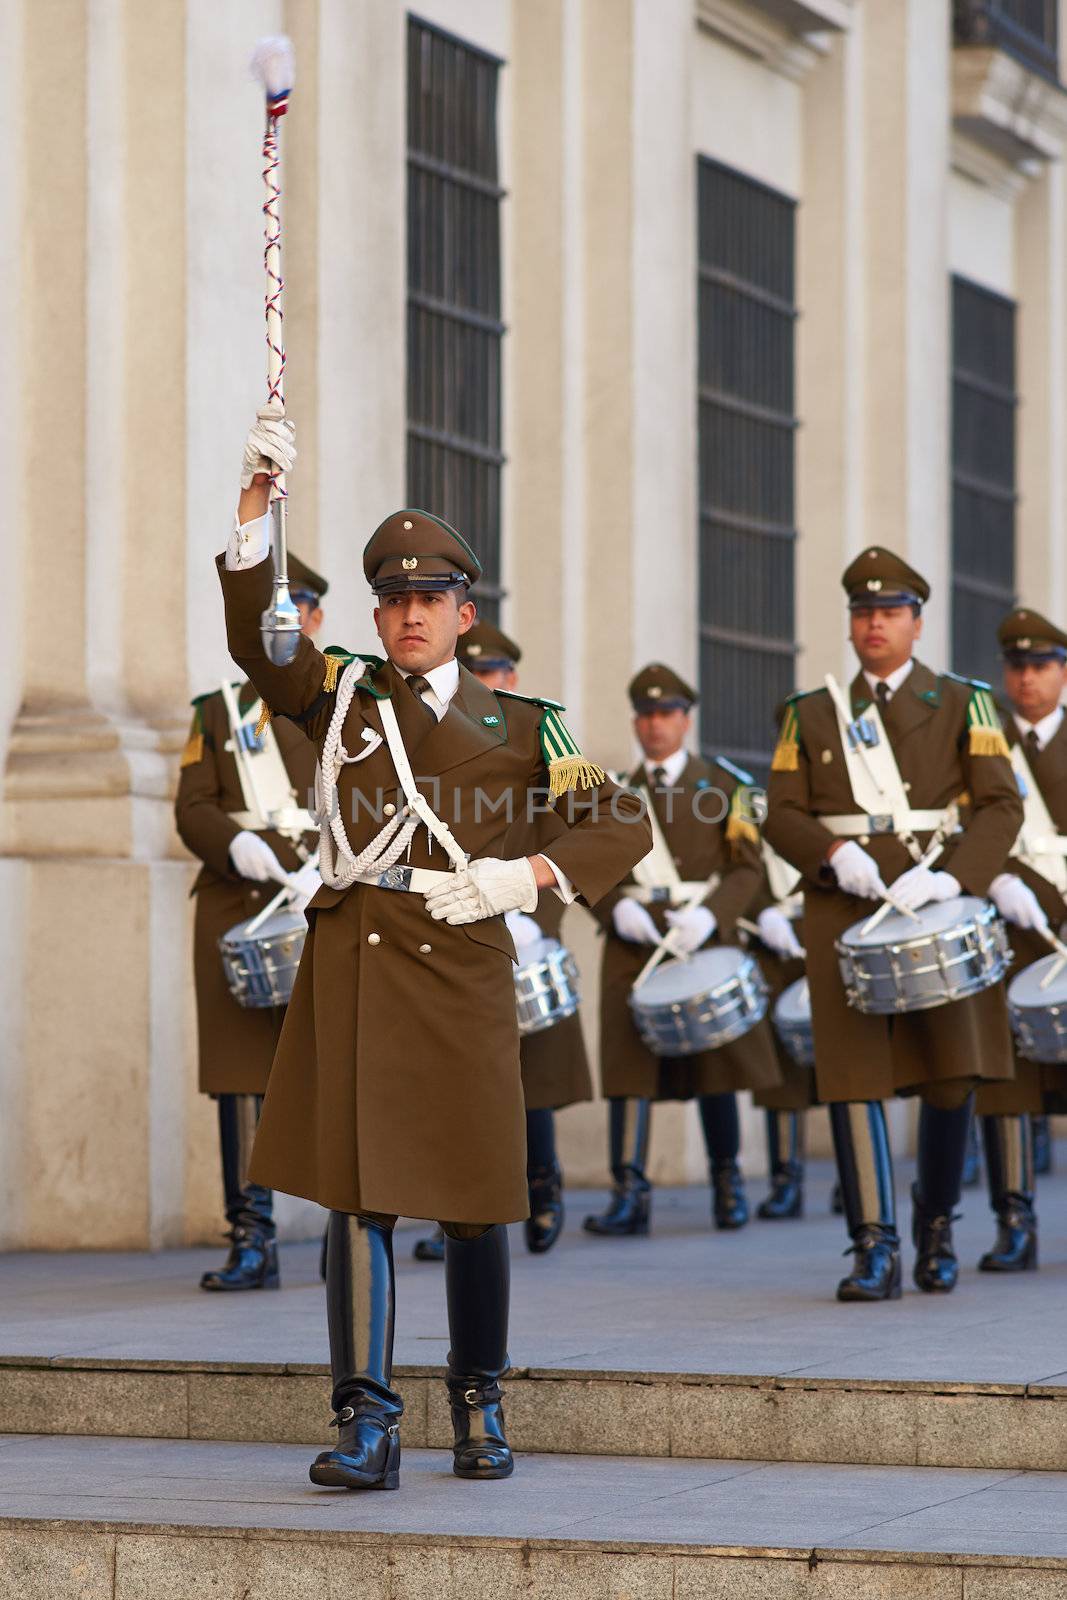 Members of the Carabineros Band marching as part of the changing of the guard ceremony at La Moneda in Santiago, Chile